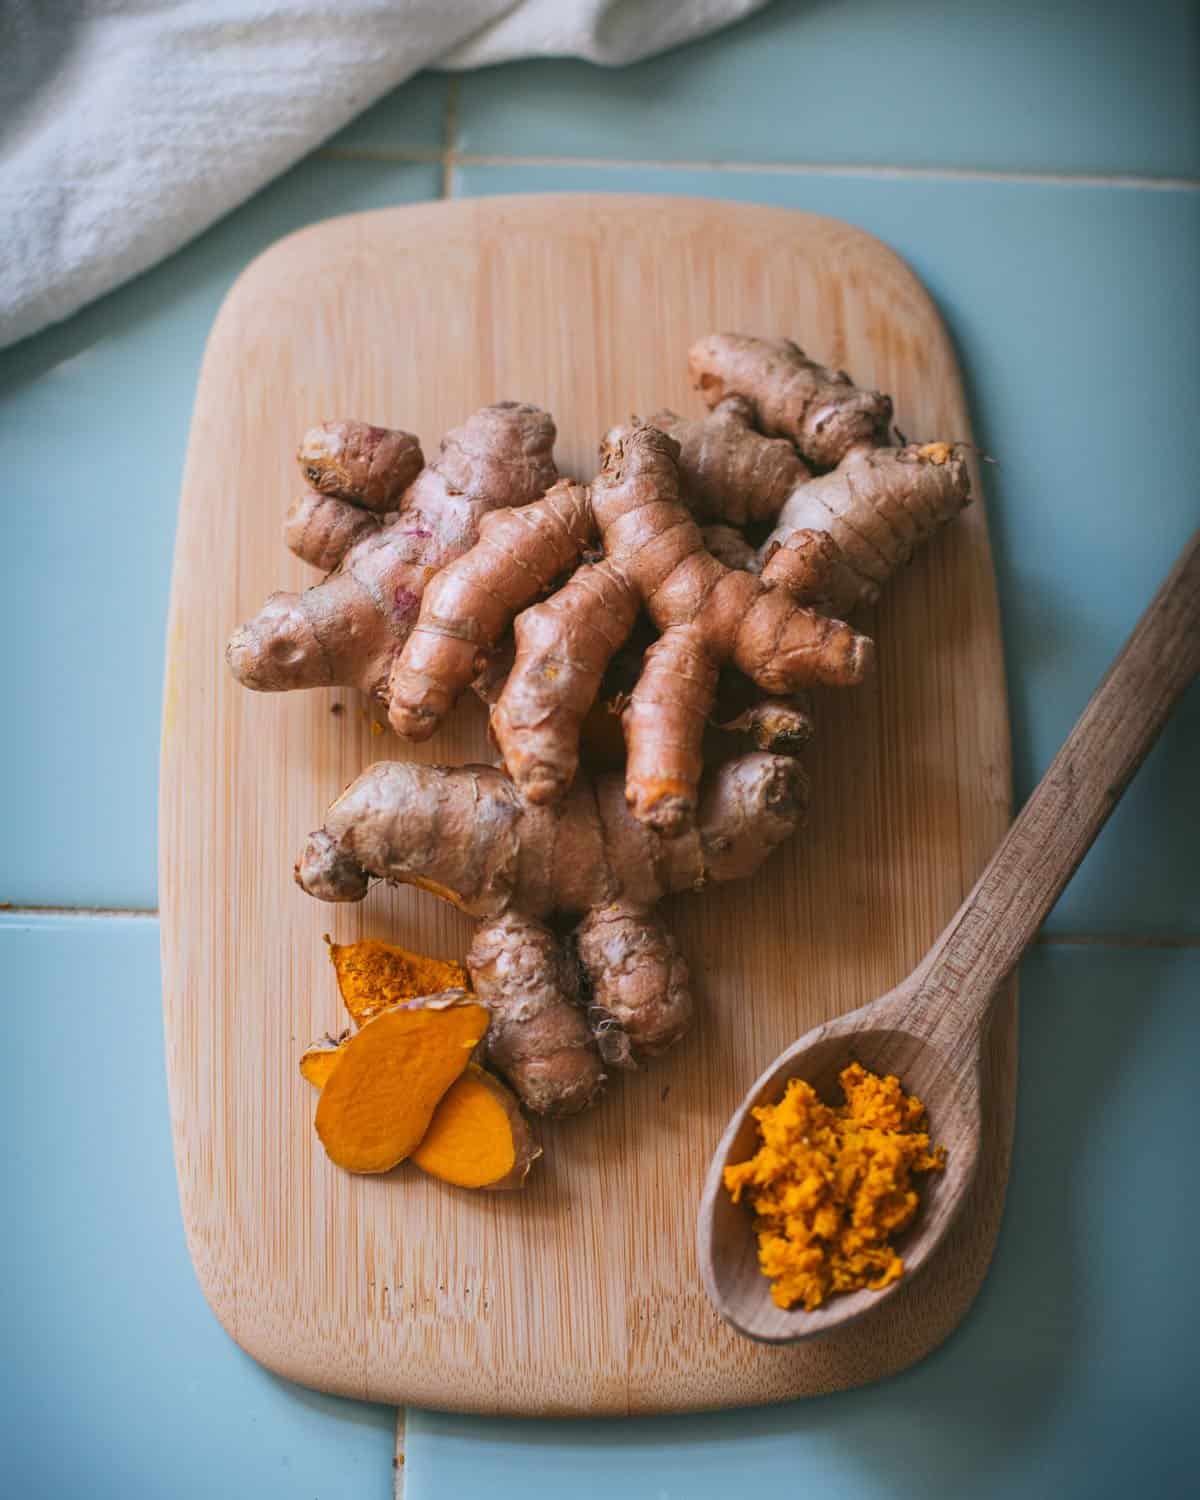 fresh whole, sliced, and grated turmeric root on a wooden cutting board